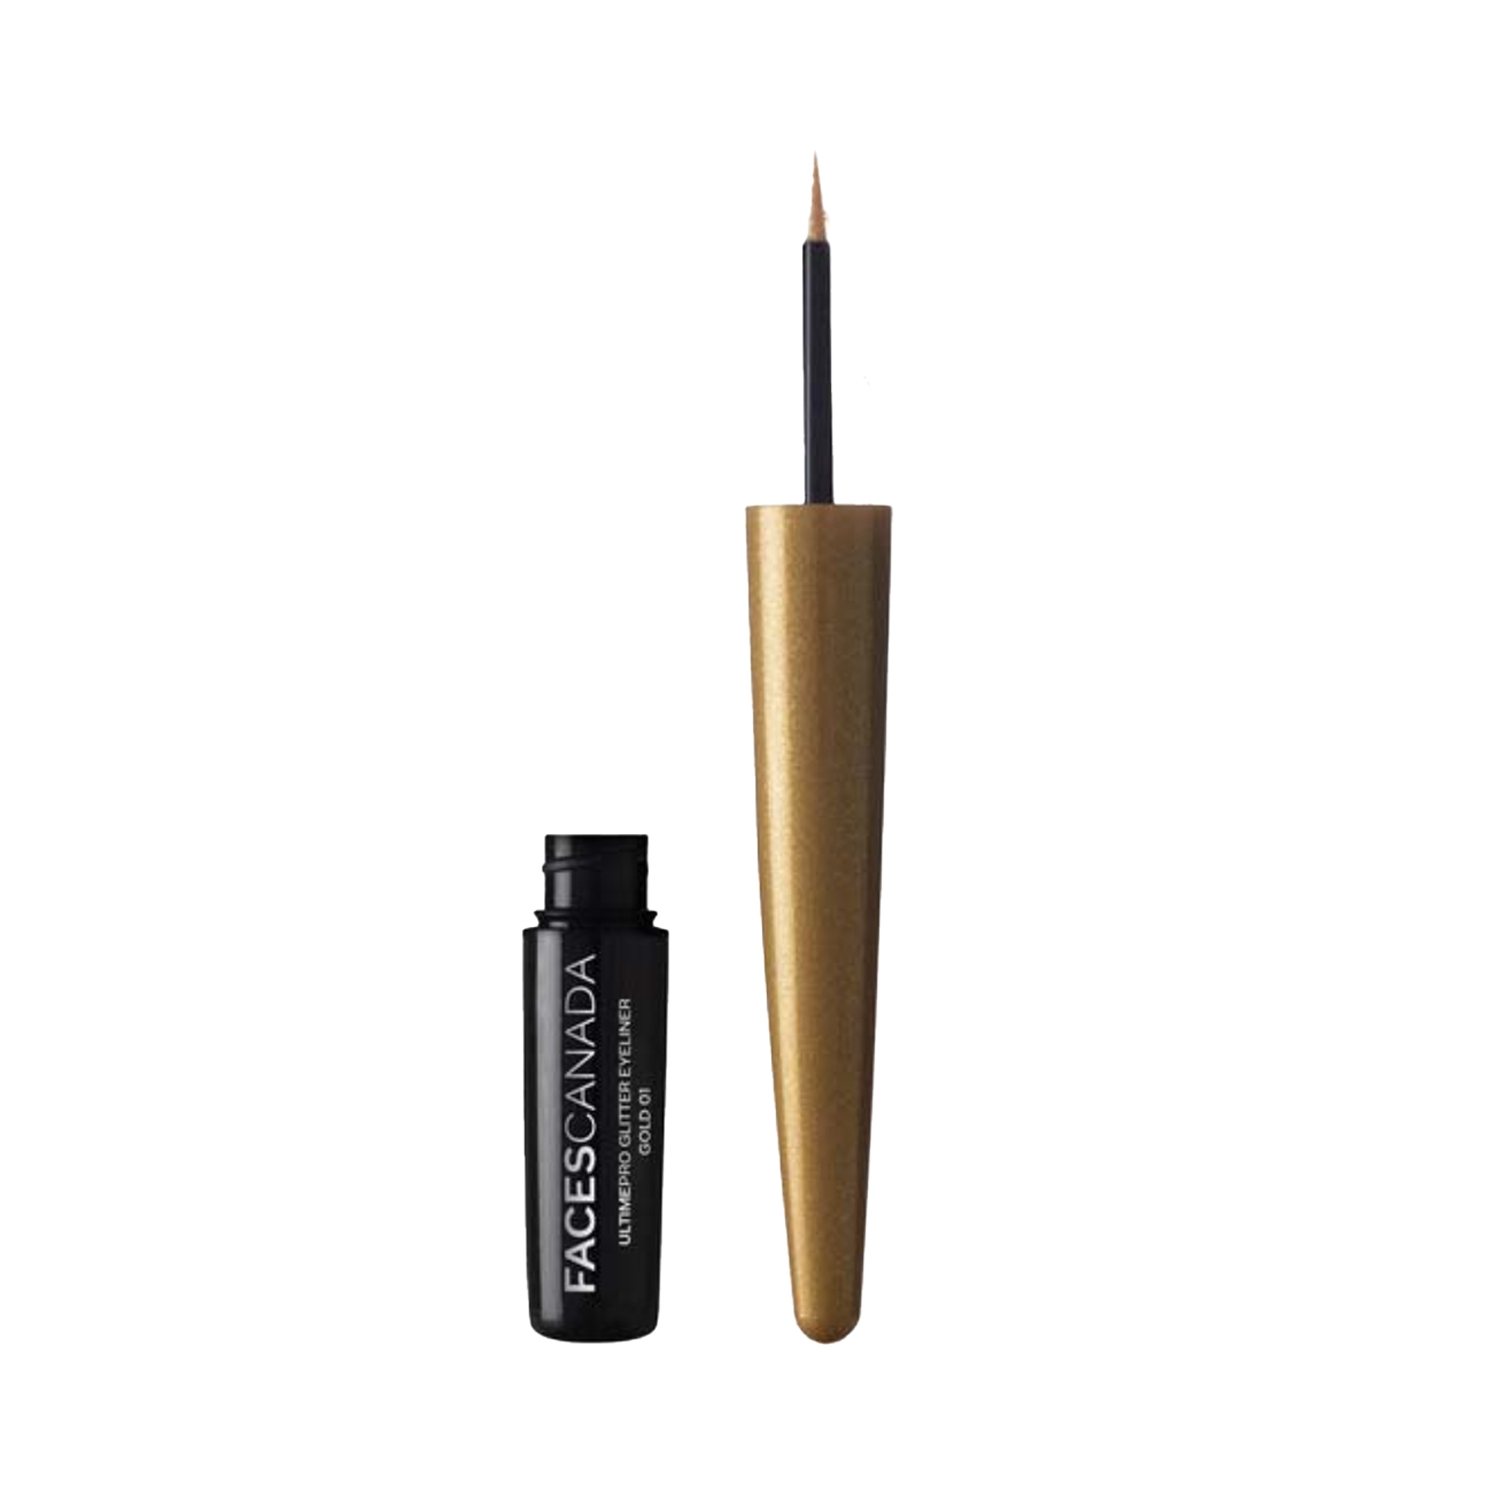 Faces Canada | Faces Canada Ultime Pro Glitter Eyeliner - 01 Gold (1.7ml)